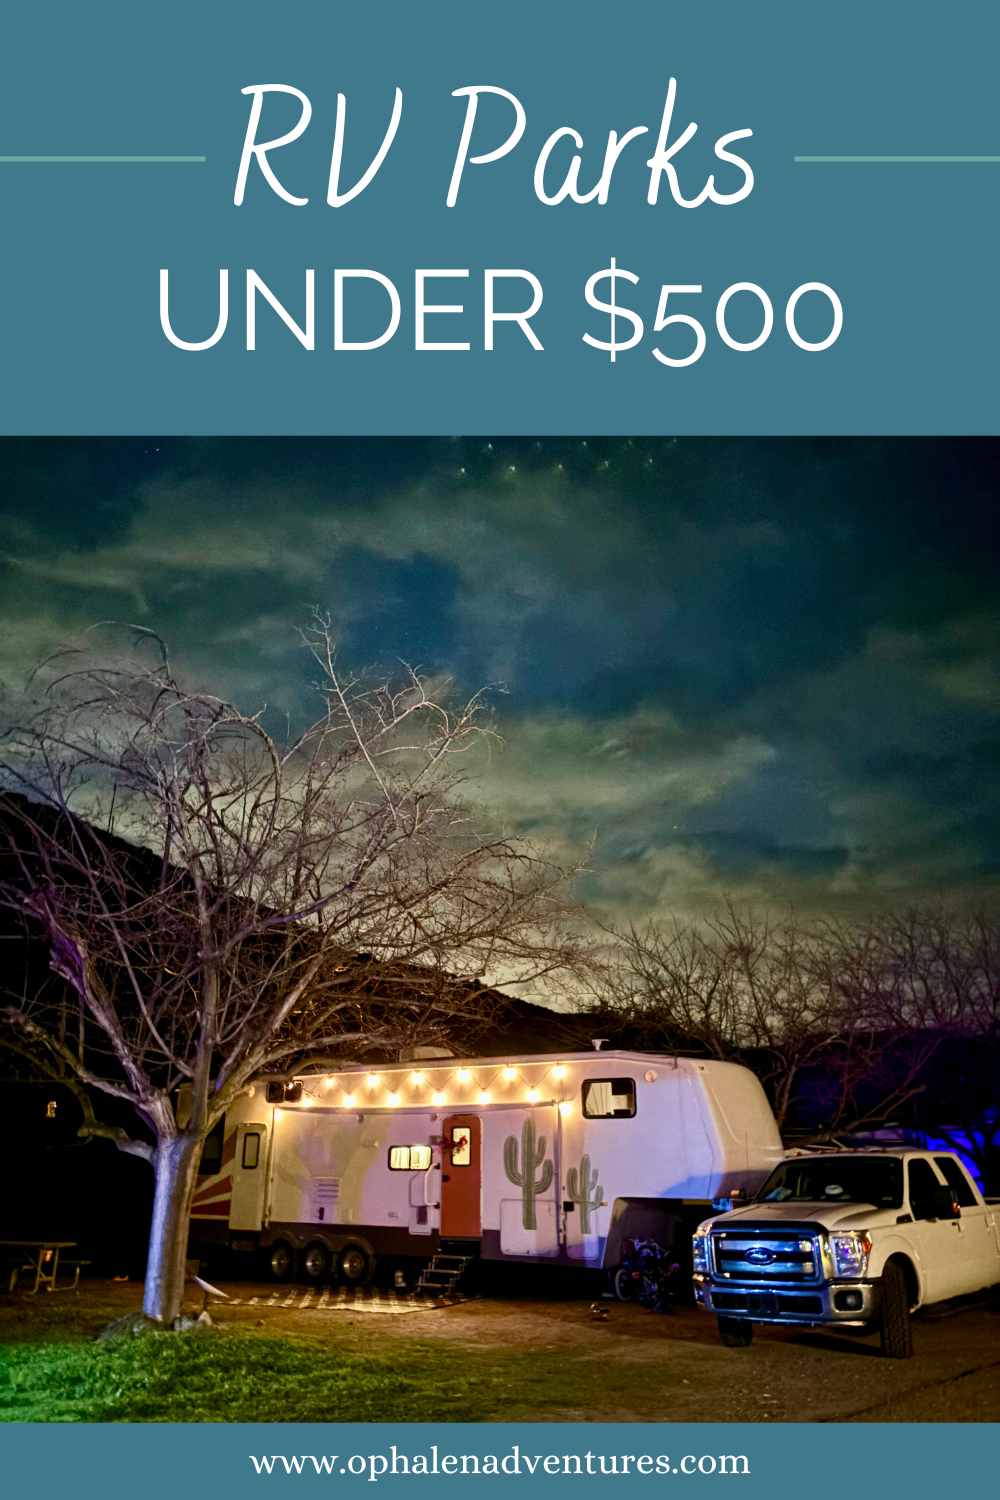 RV Parks under $500, Fifth wheel parked in a campground at night | O'Phalen Adventures